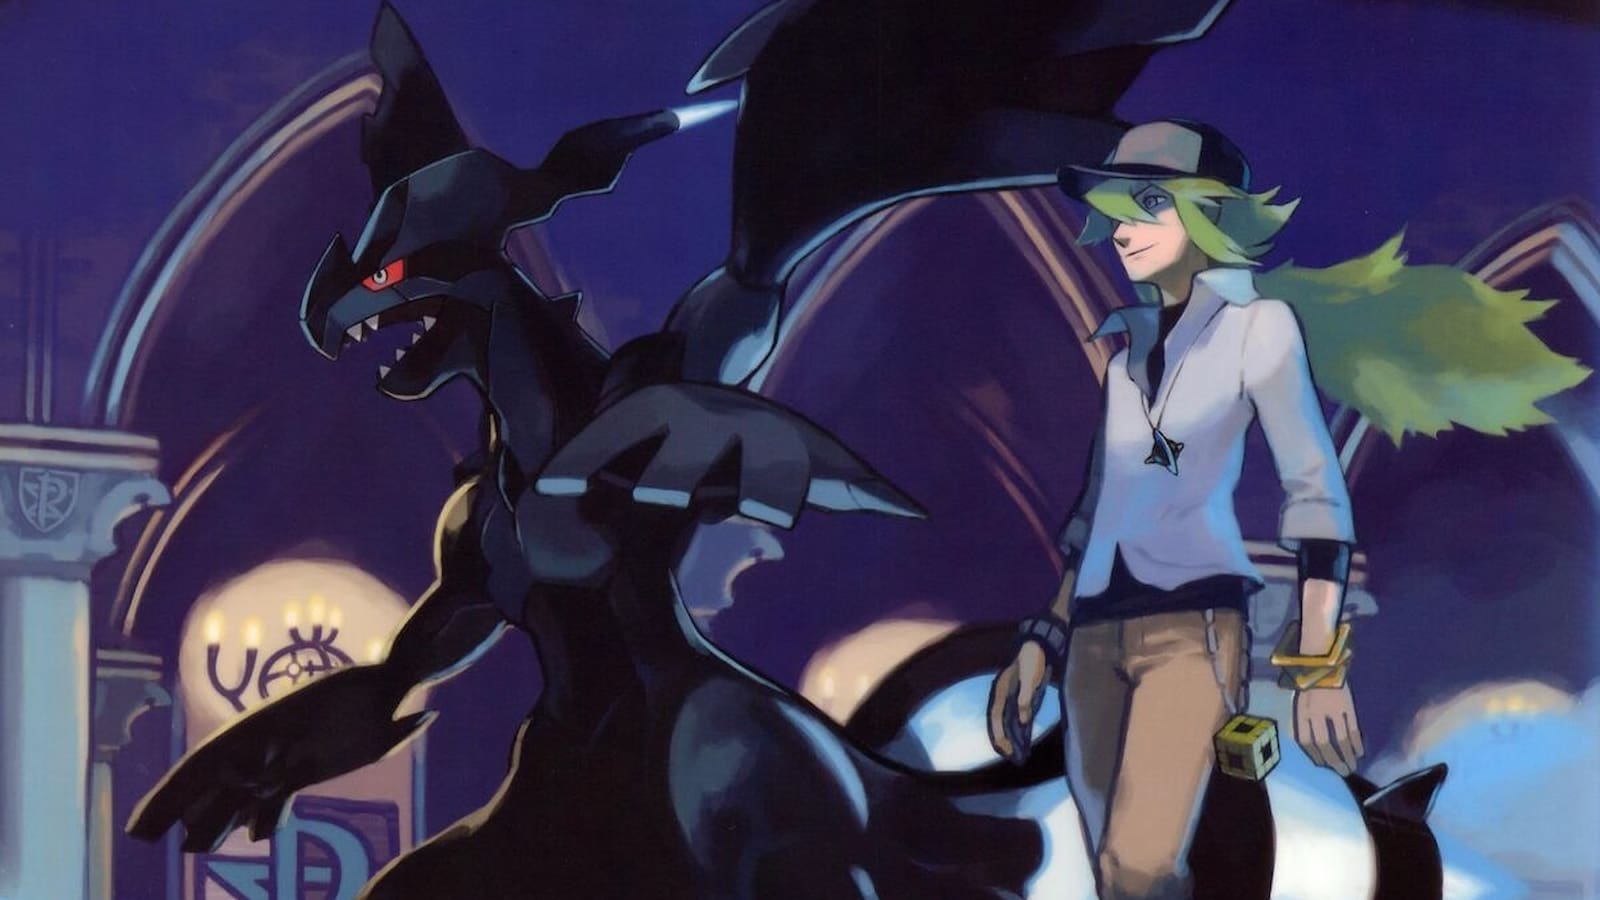 N and Zekrom together in official Pokemon Black & White artwork